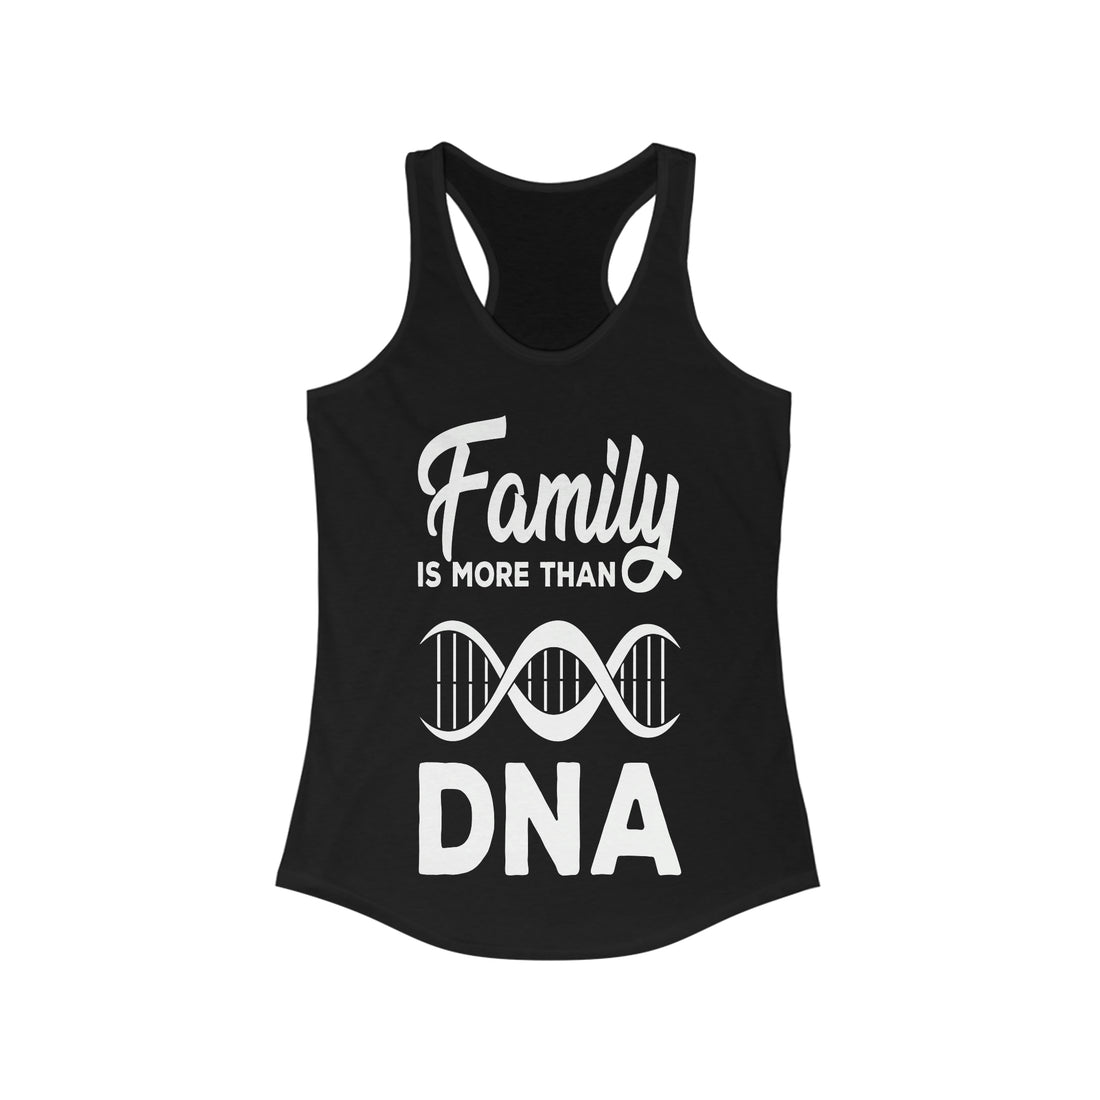 Family is more than DNA - Racerback Tank Top